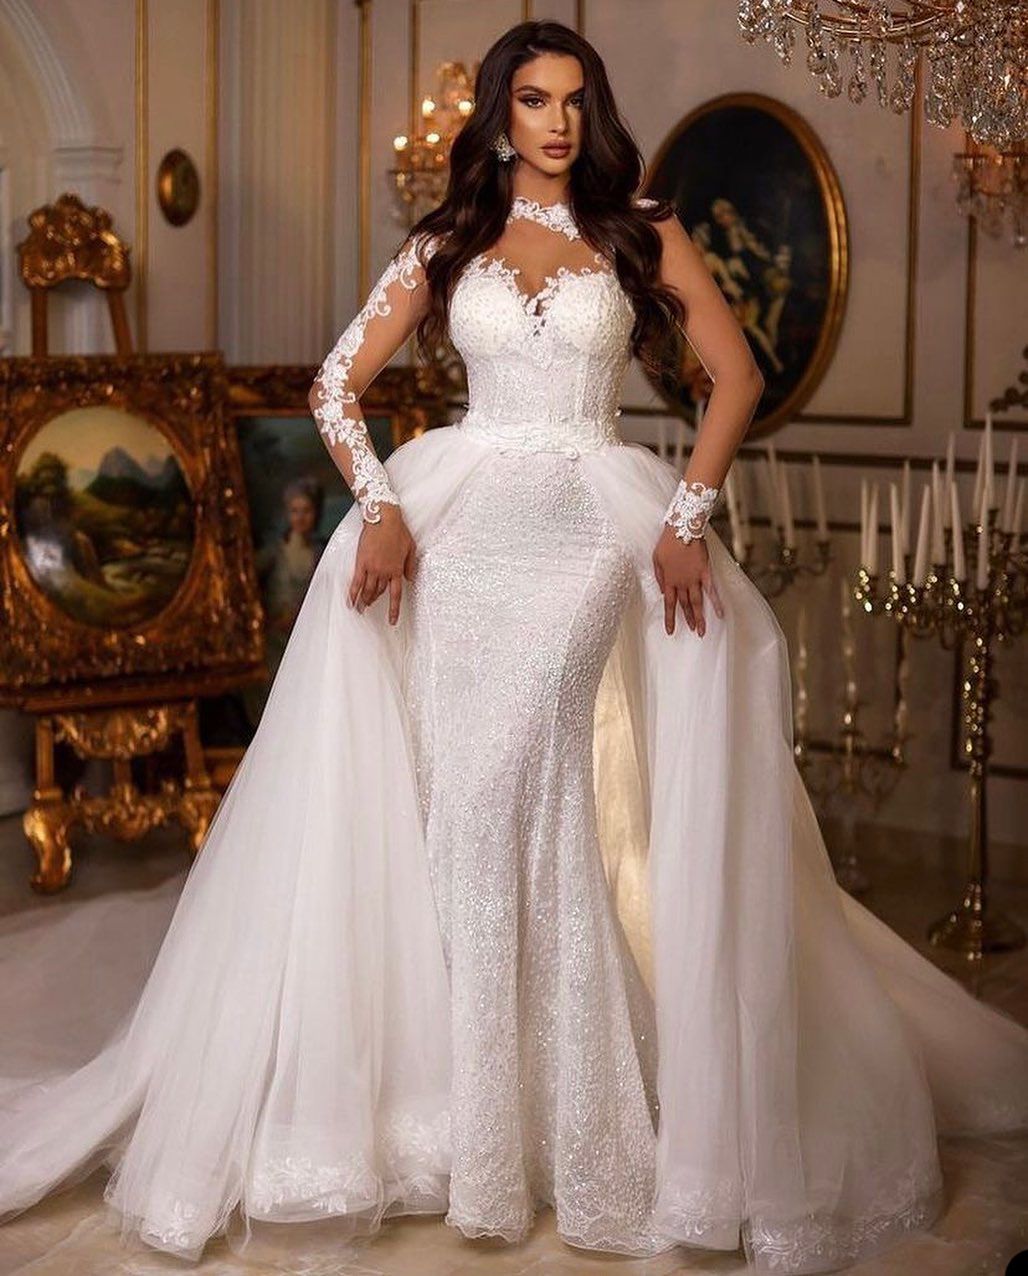 2023 Sexy Wedding Dresses Bridal Gowns Overskirts Lace Appliques Crystal Beads Mermaid Long Sleeves Jewel Neck Illusion Sheer Tulle Custom Made Country Plus Size